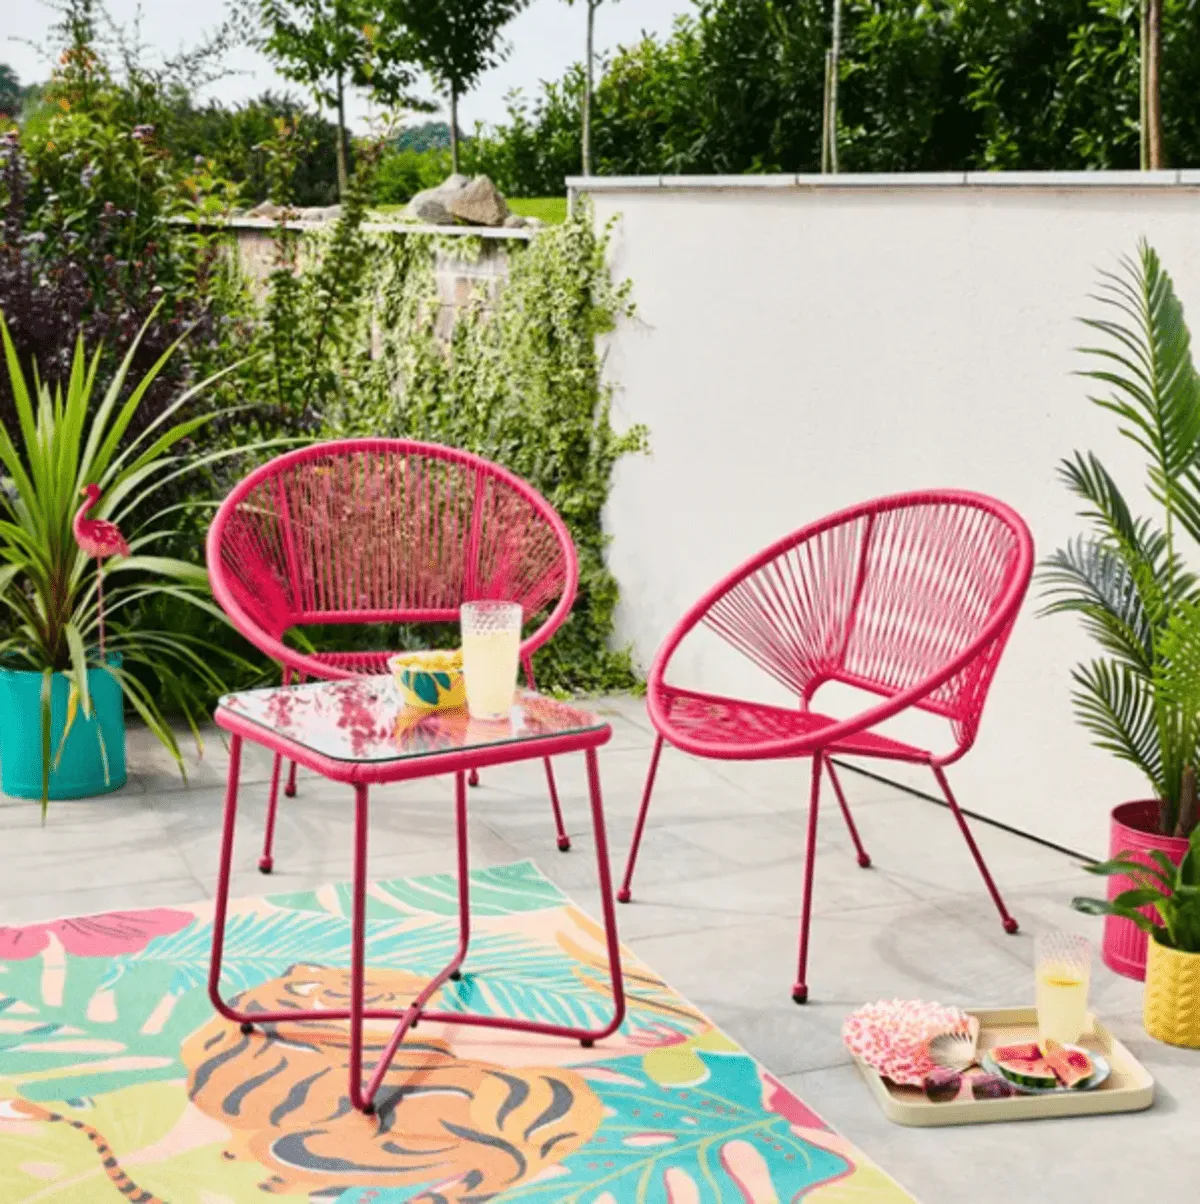 pair of bright pink string seats and a pink table in a small backyard with plants